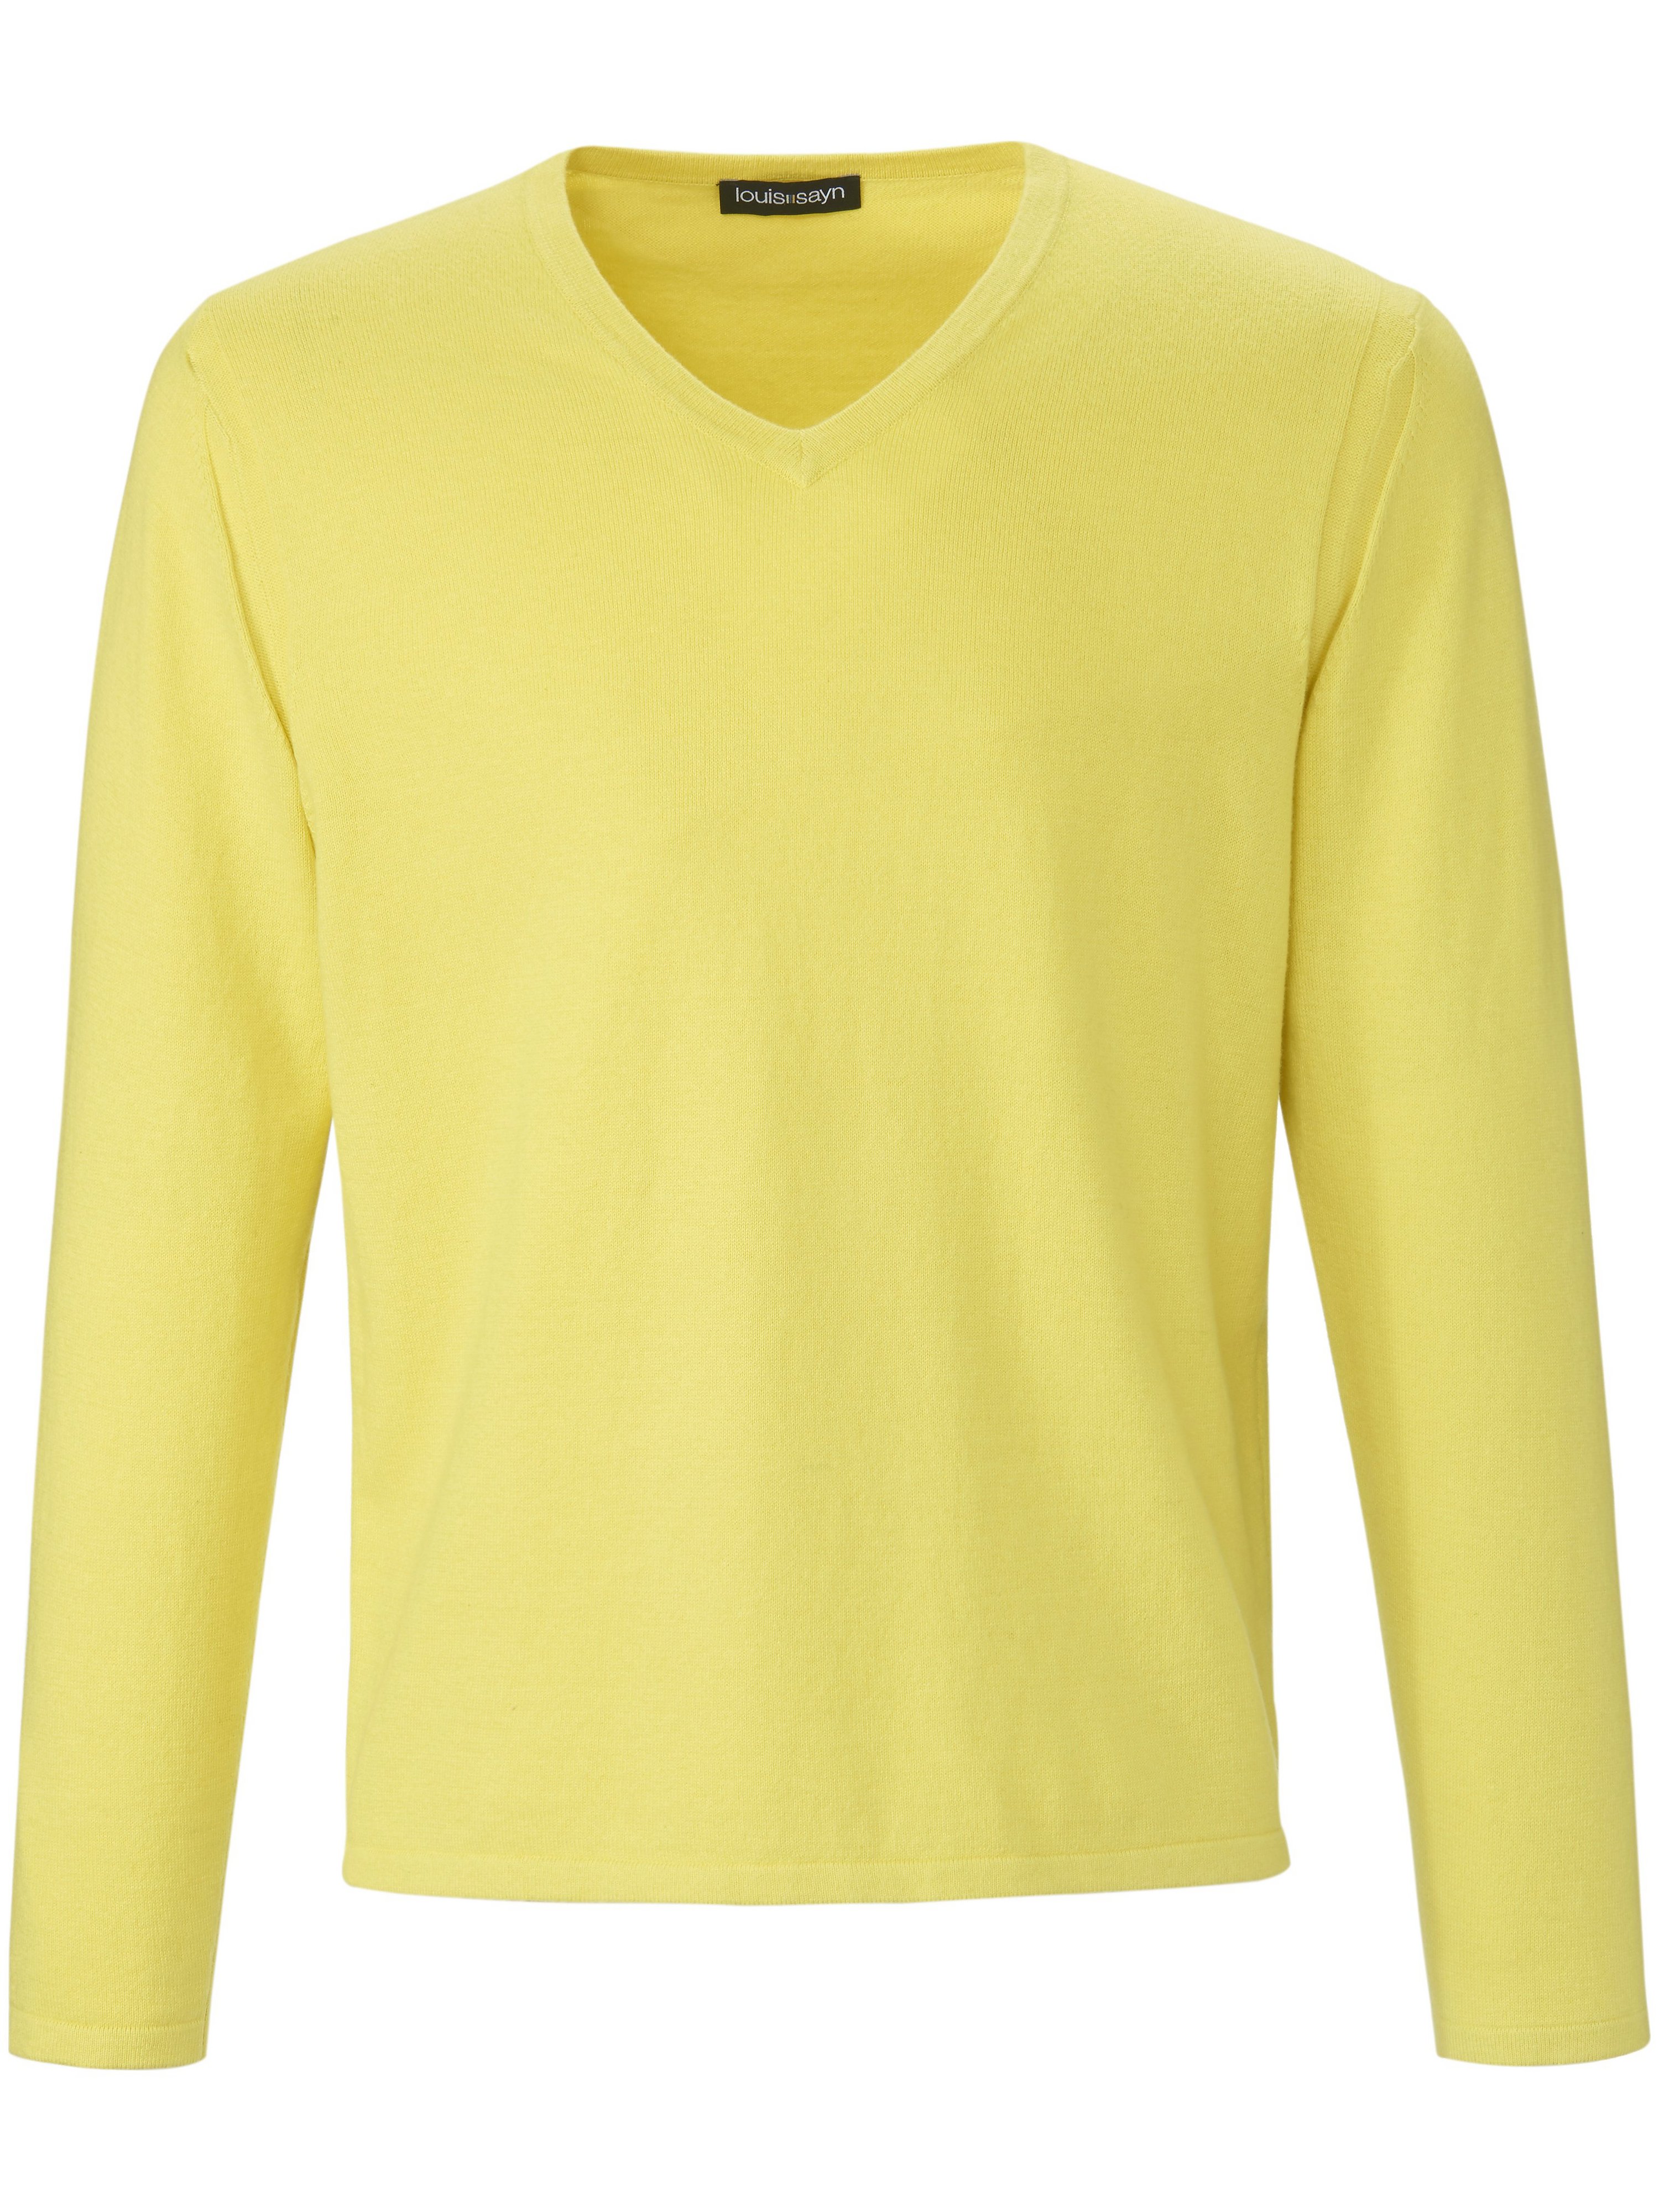 Le pull col V  Louis Sayn jaune taille 48